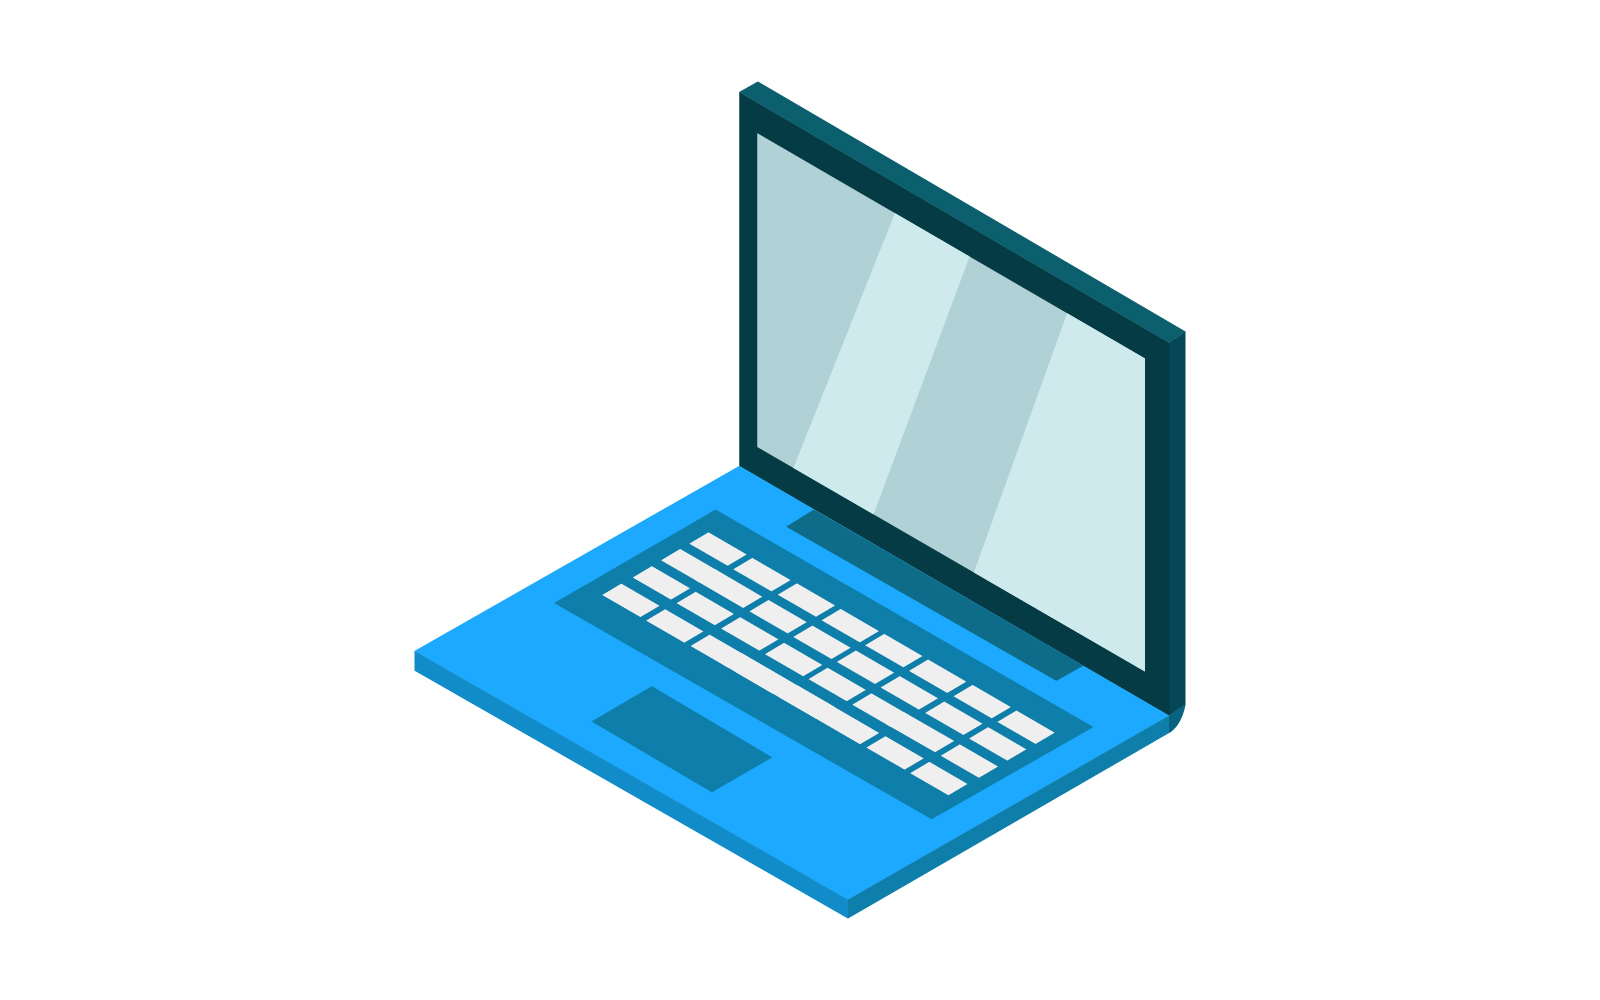 Laptop illustrated in vector and colored on a white background